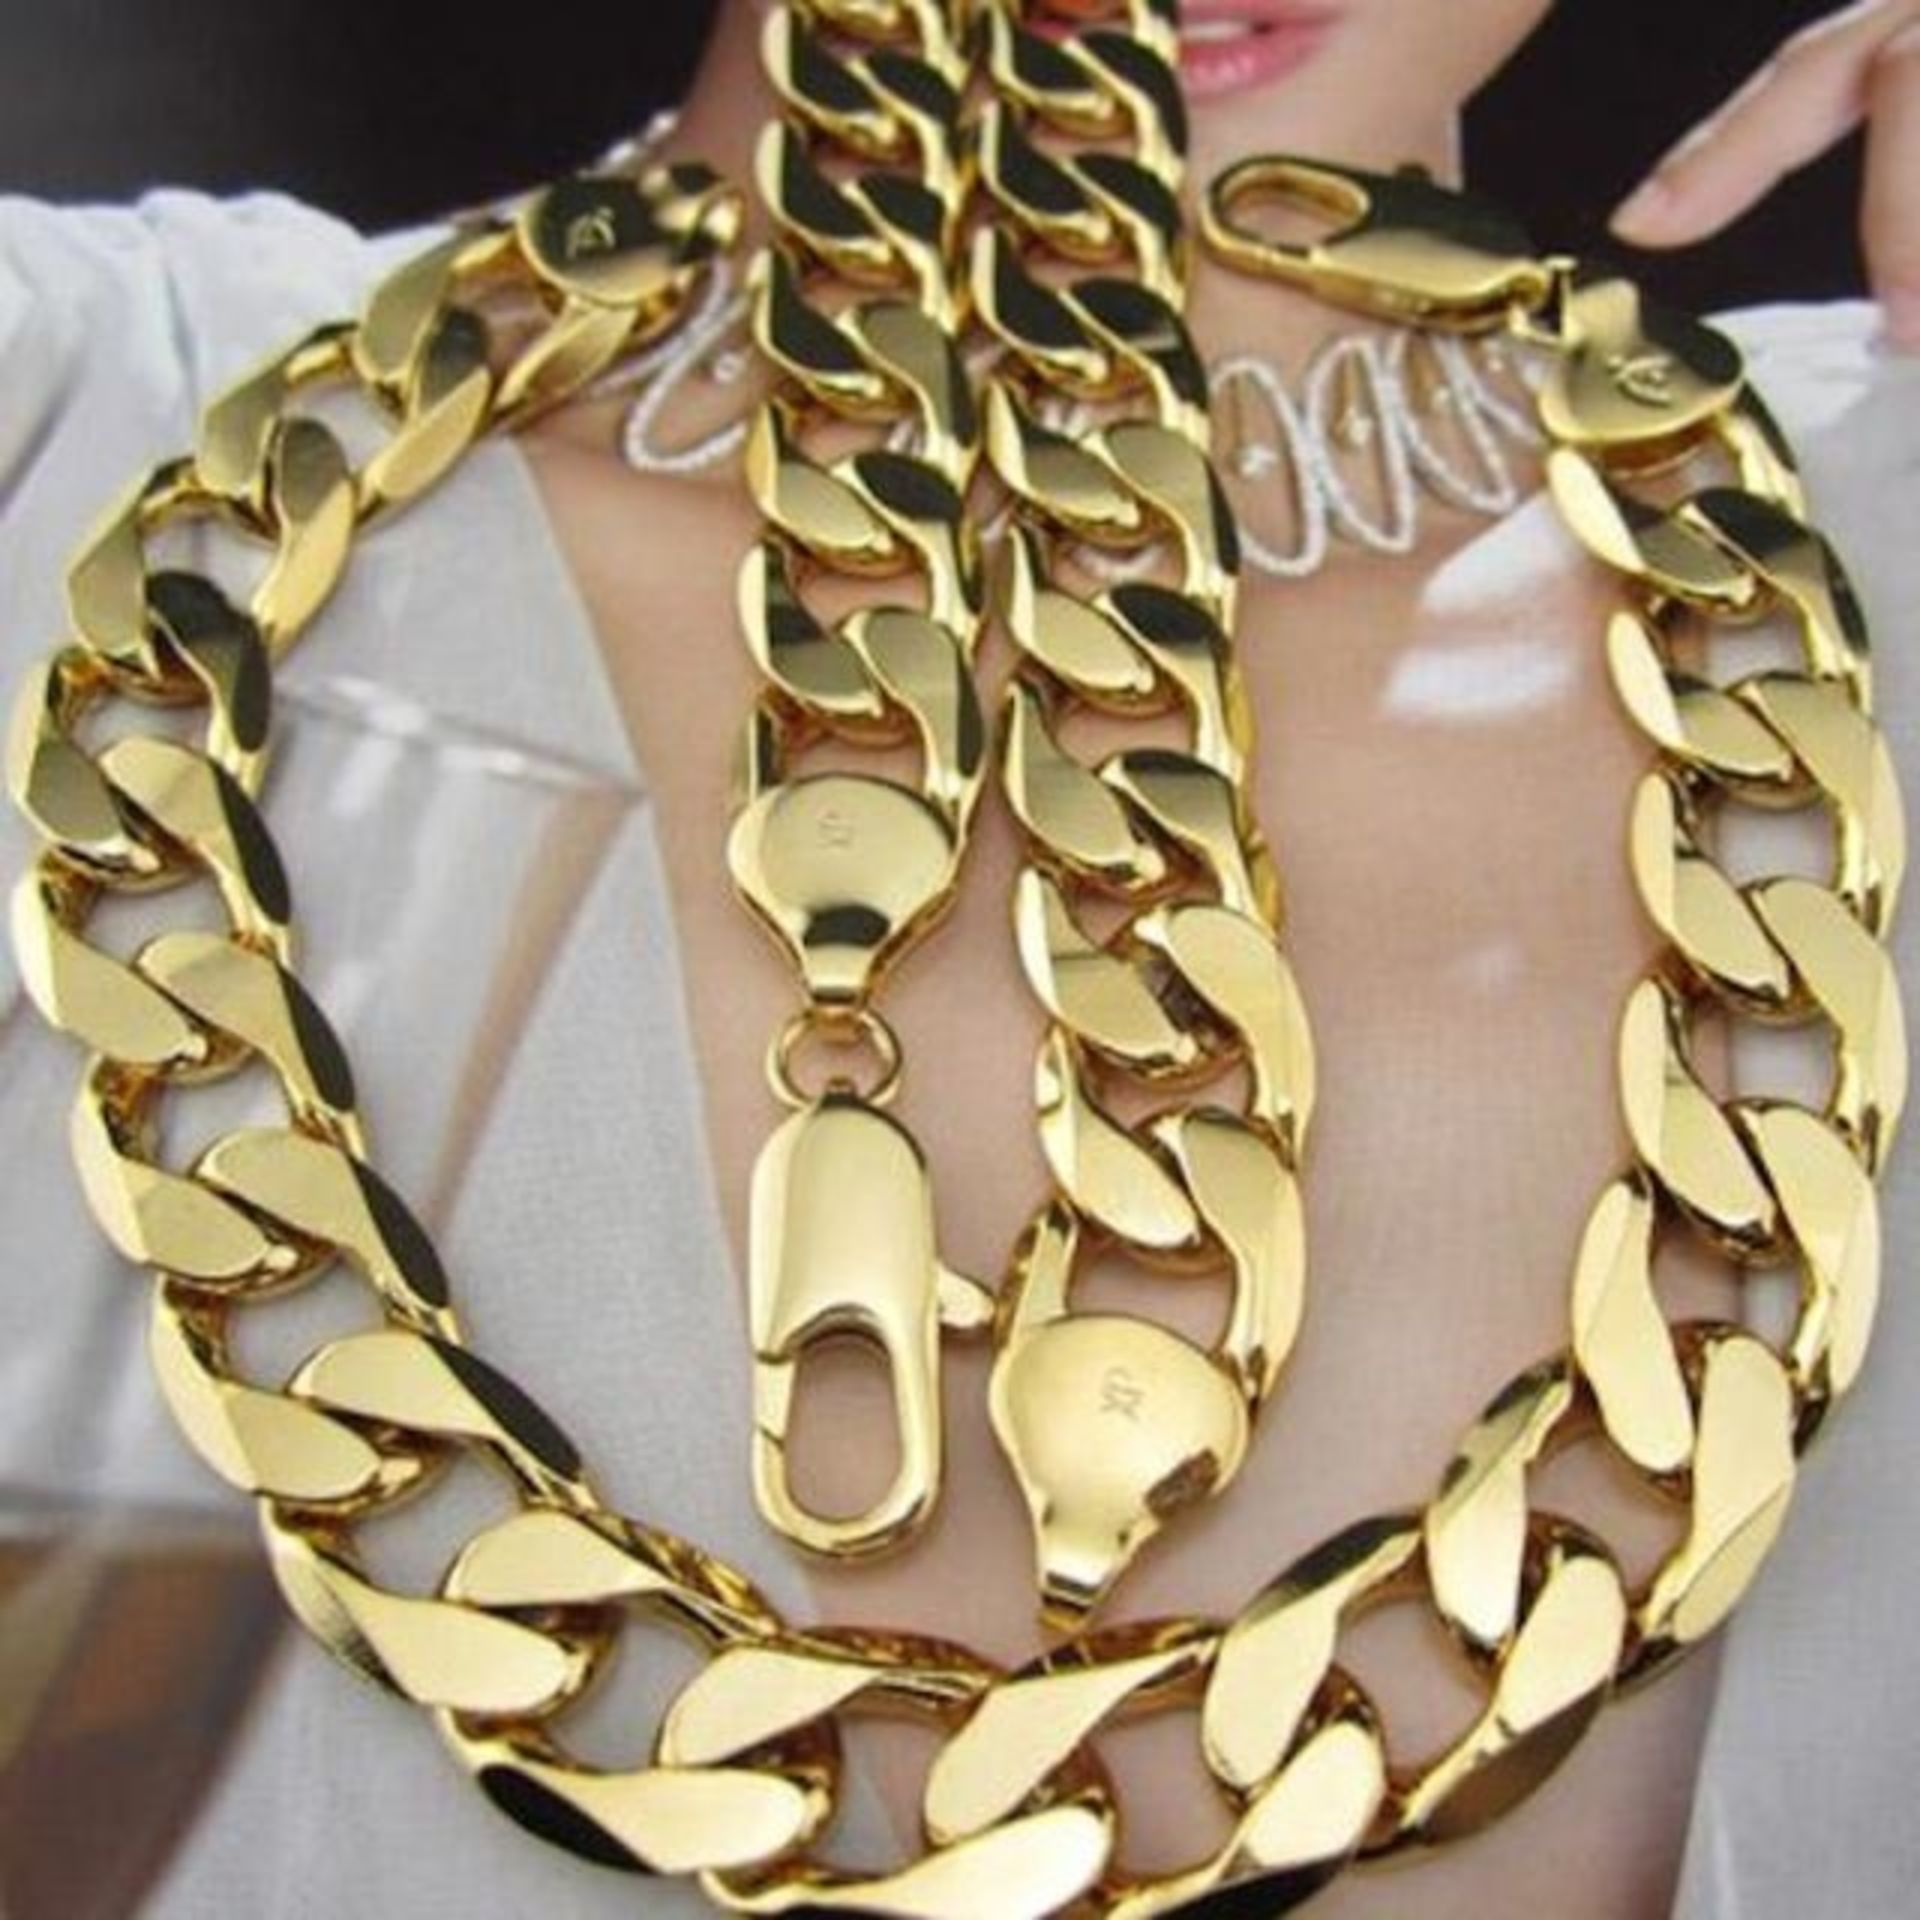 Gold Filled Curb Link Chain Necklace and Bracelet set, new, Necklace is 24" and weighs 160 grams,